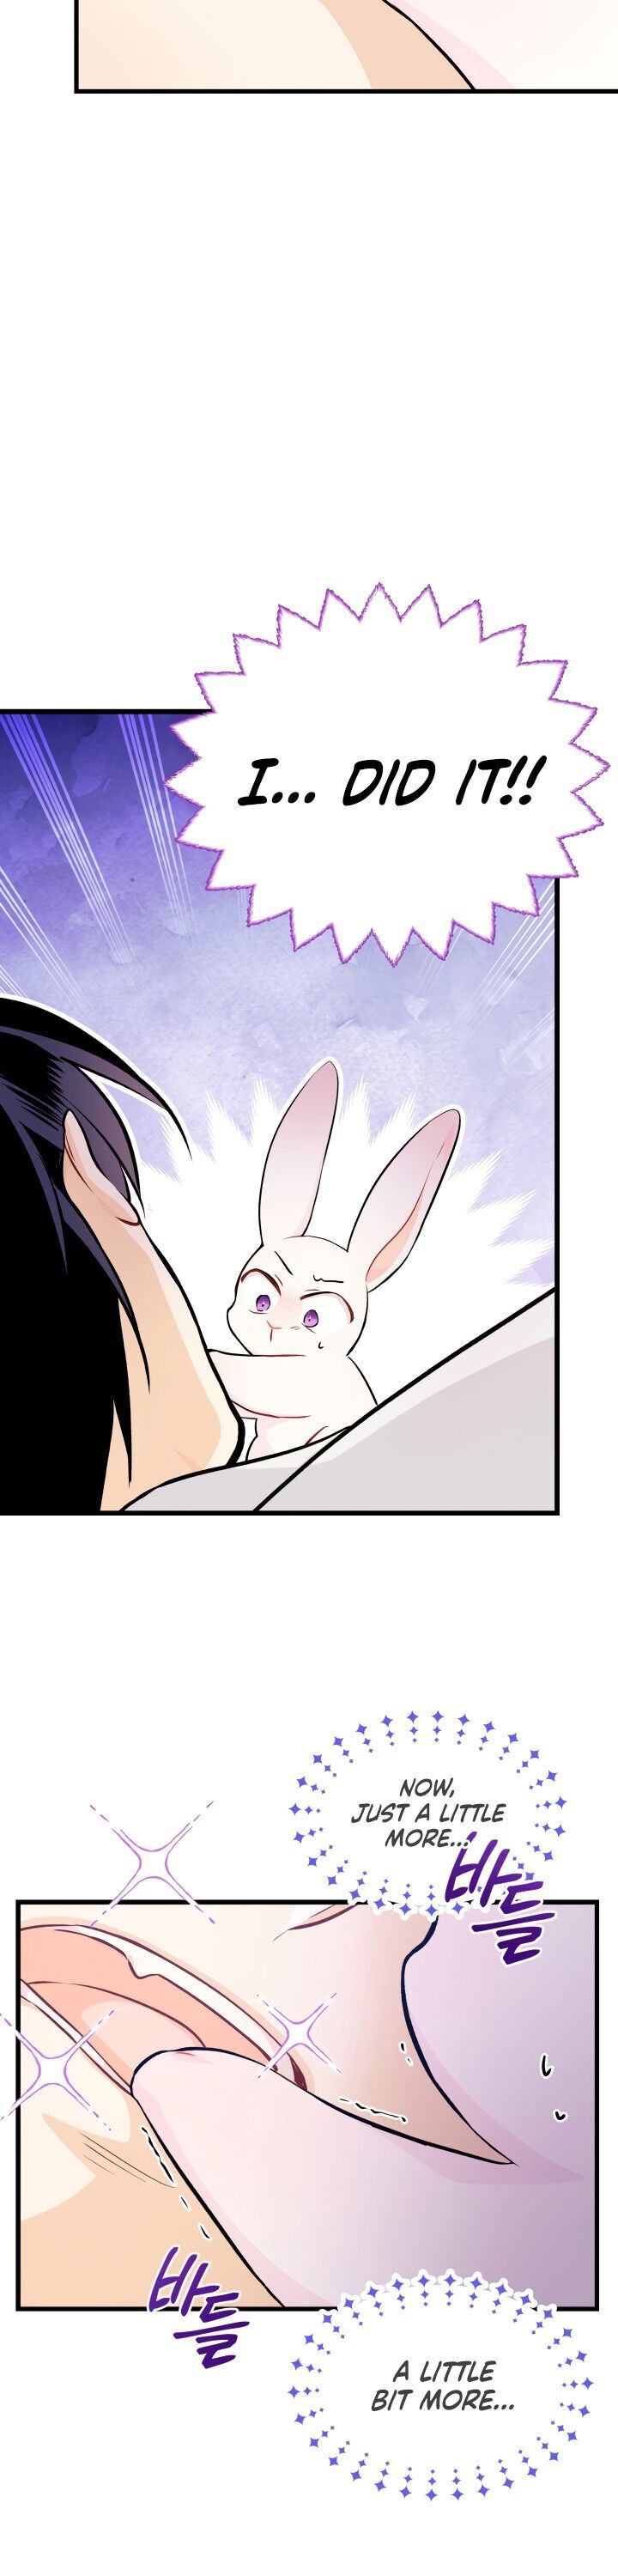 A Symbiotic Relationship Between A Rabbit And A Black Panther Chapter 16 page 16